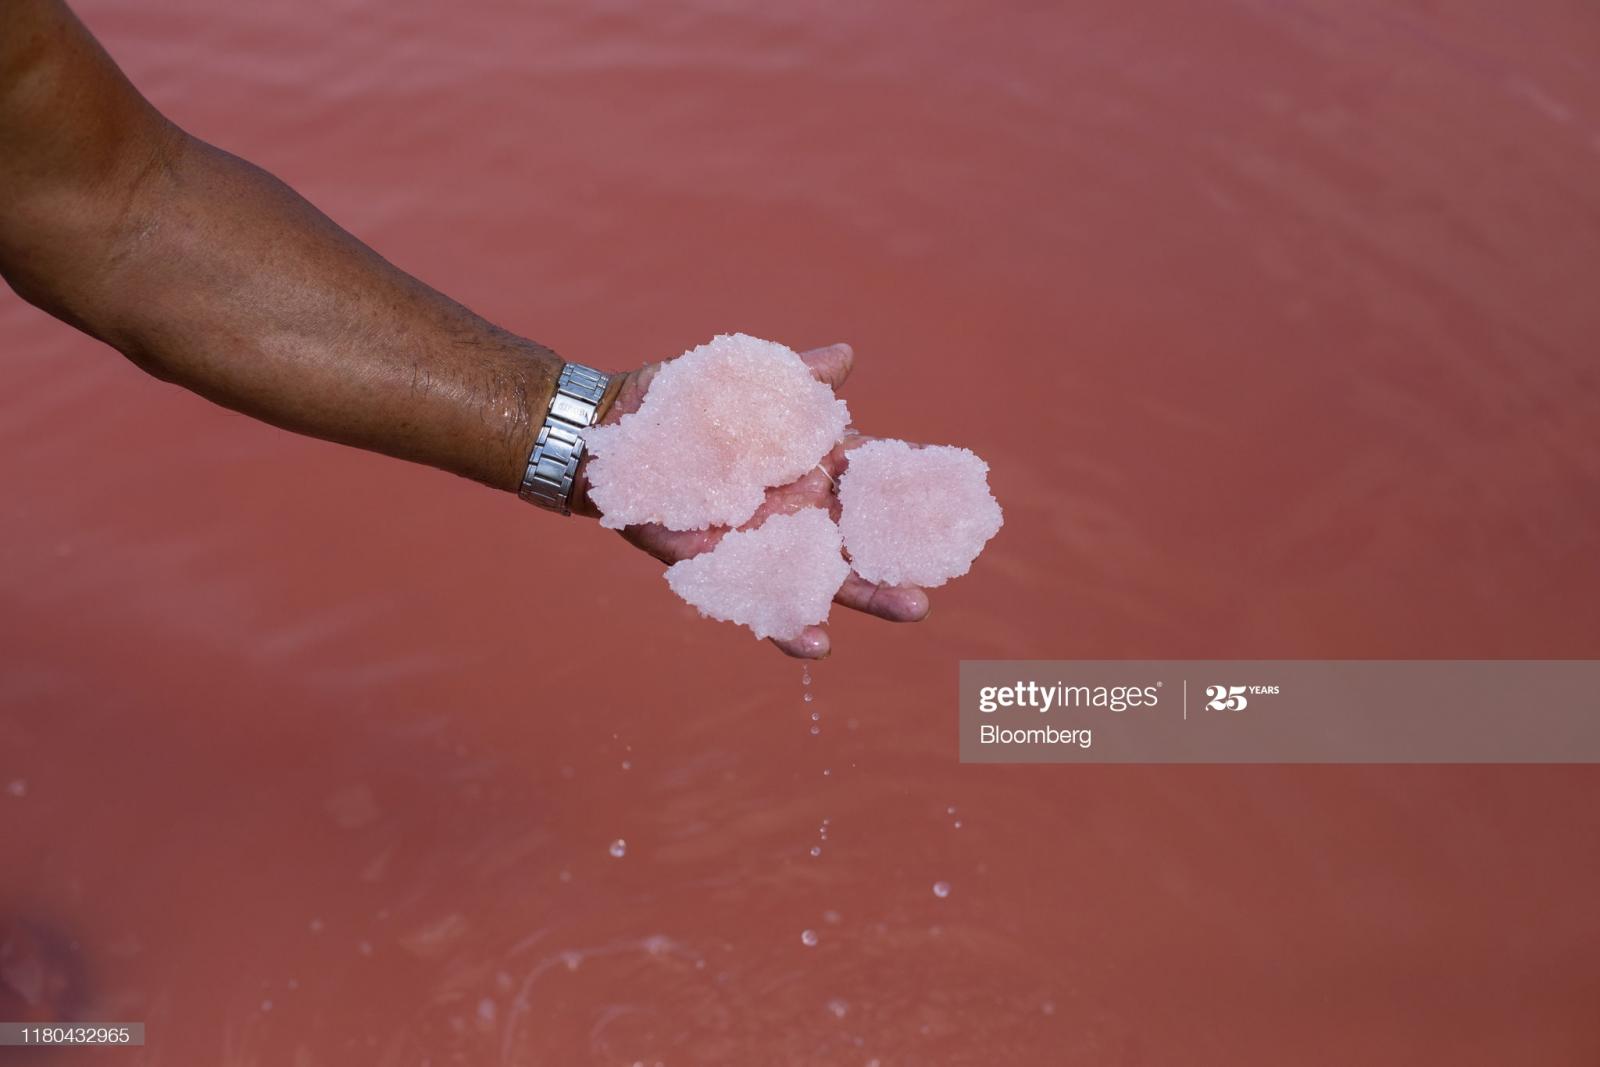 A worker collects salt from a l...allo/Bloomberg via Getty Images